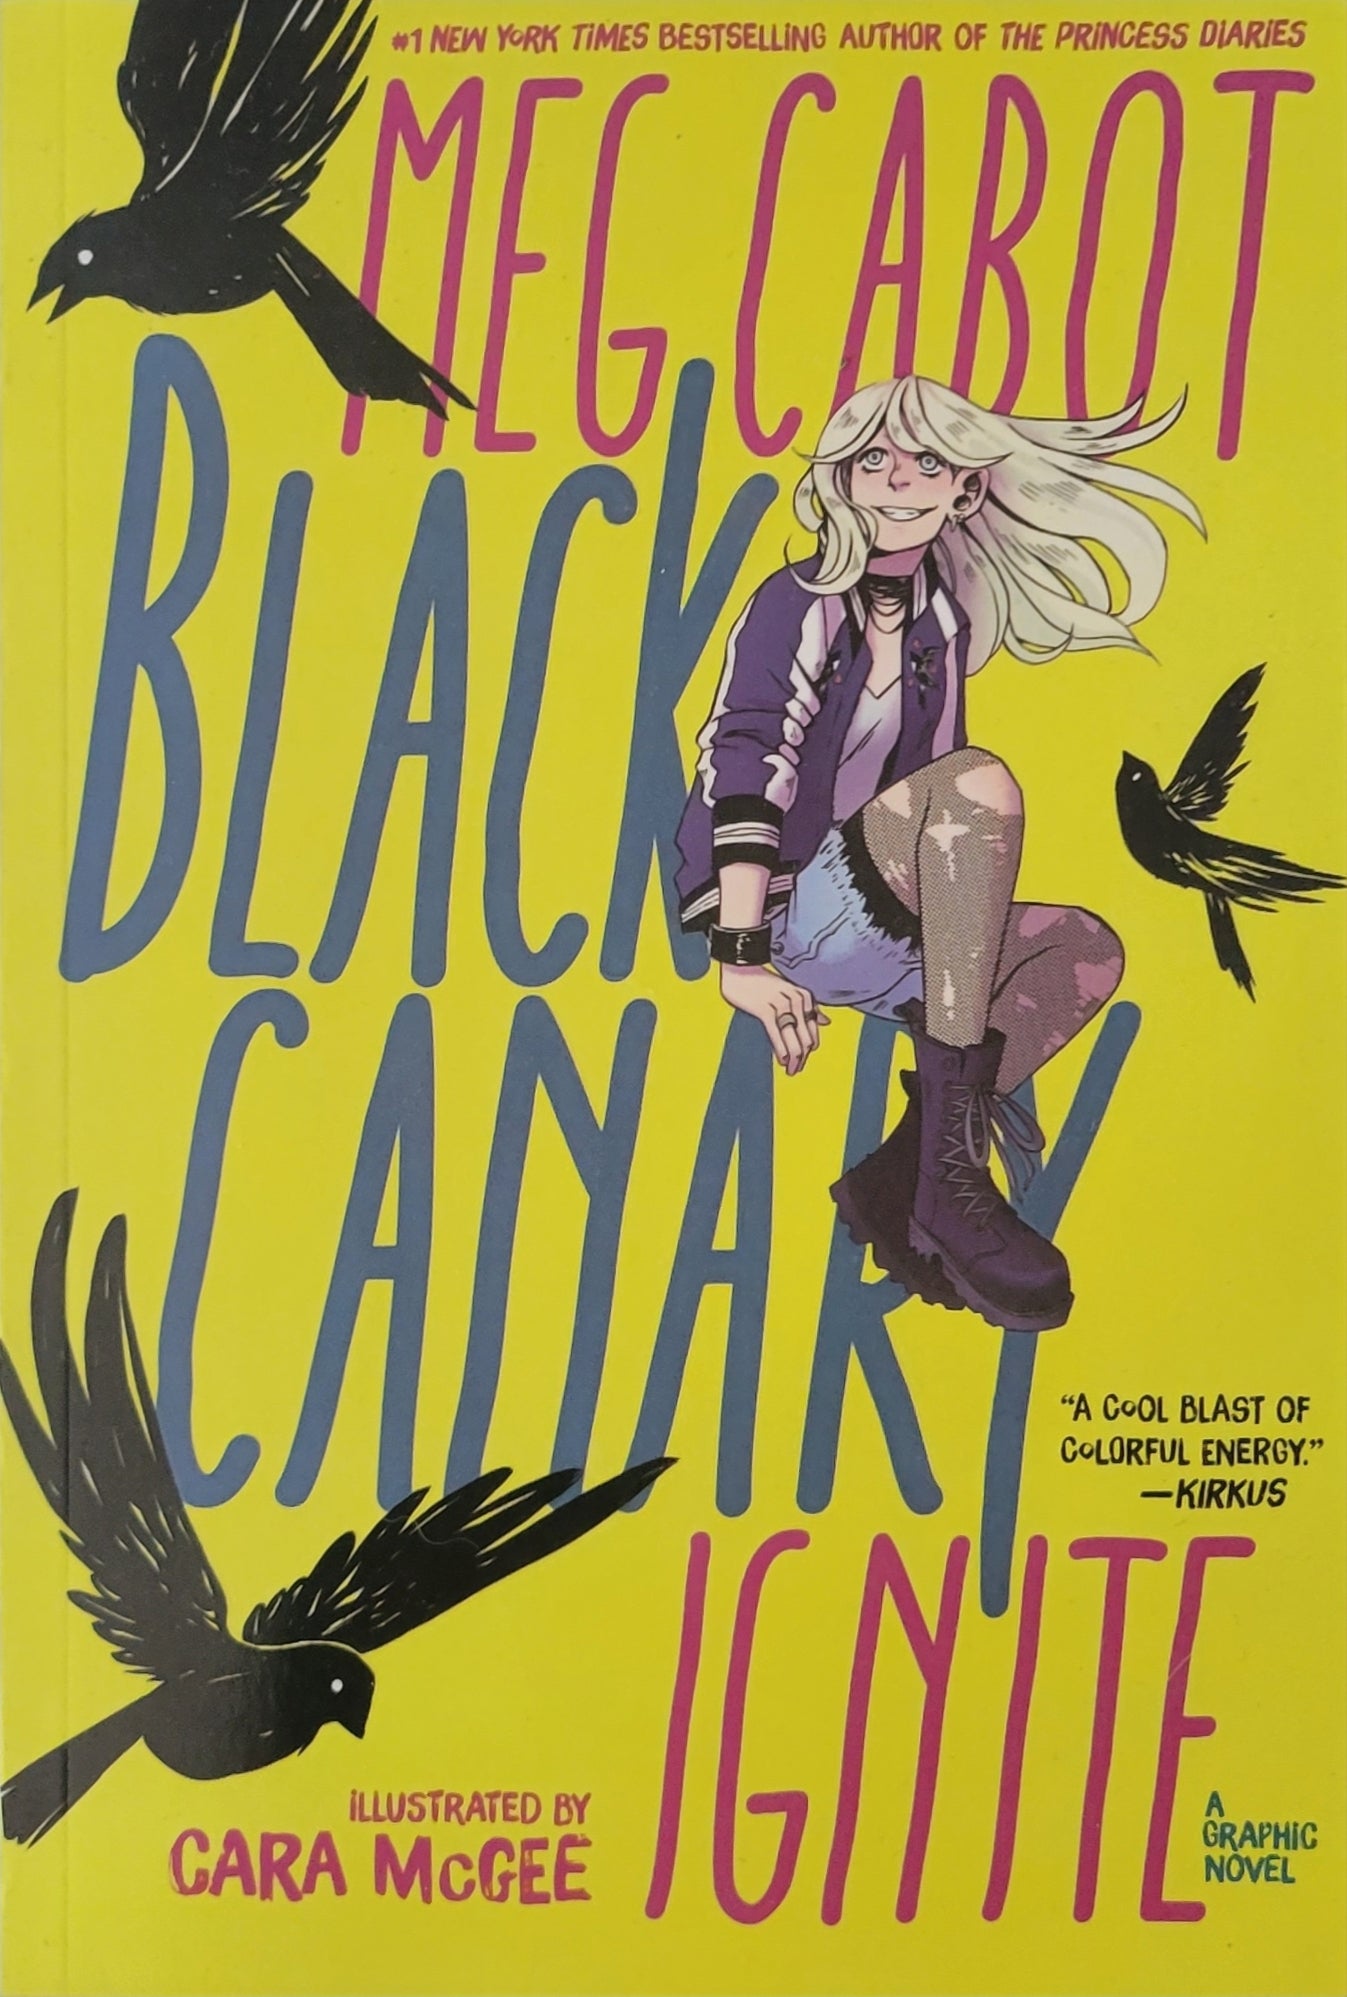 Black Canary Ignite TP DC ZOOM by Meg Cabot